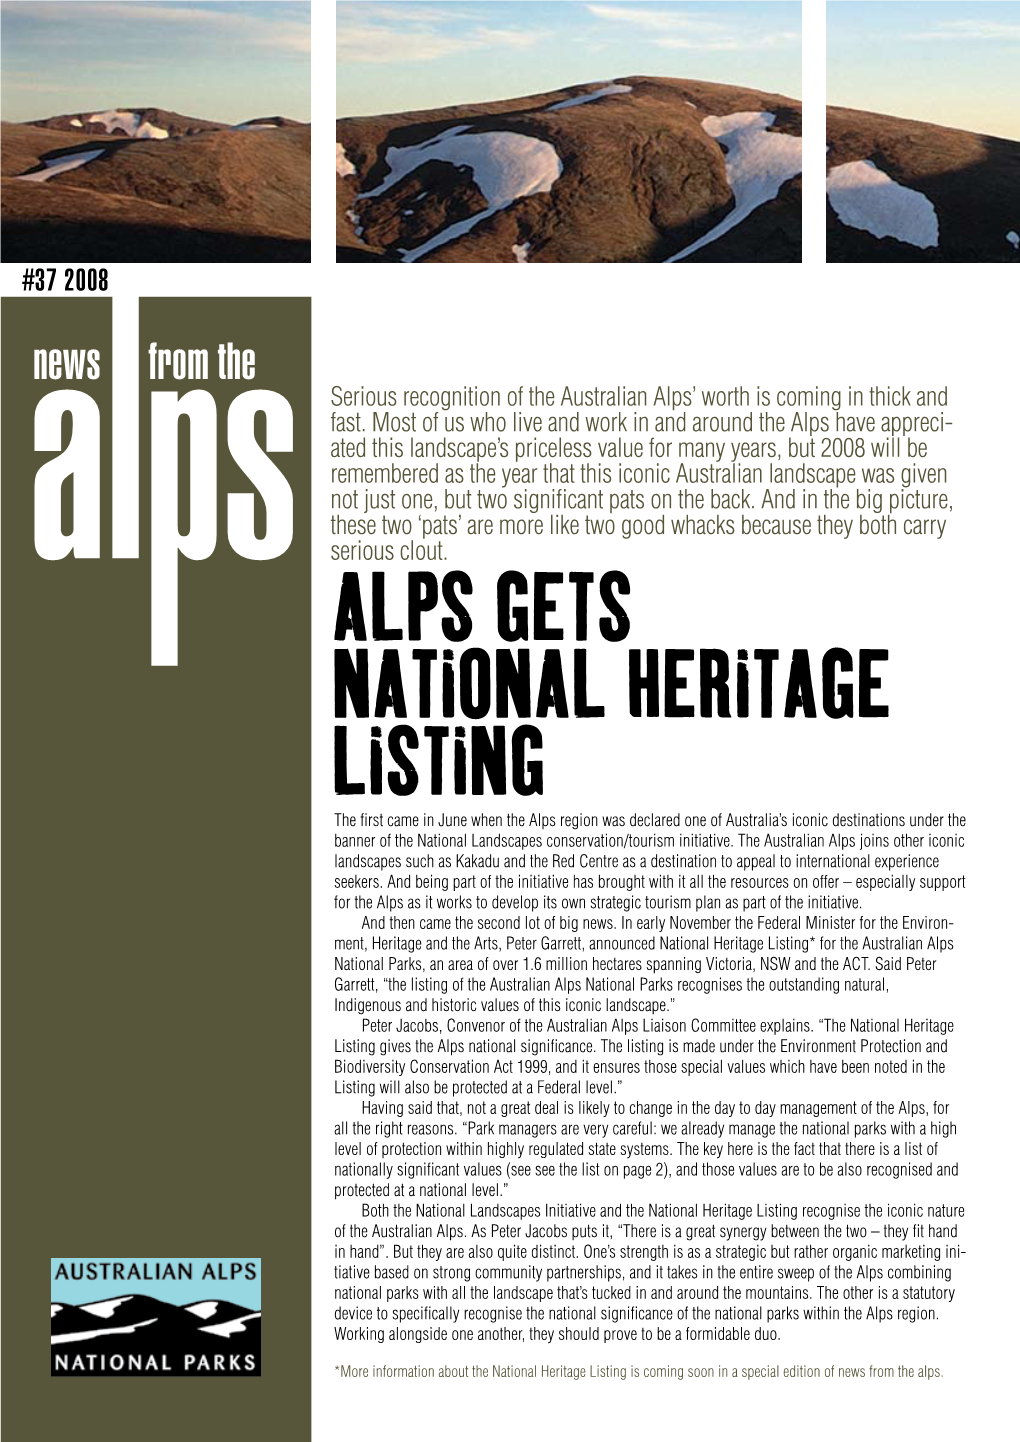 News from the Serious Recognition of the Australian Alps’ Worth Is Coming in Thick and Fast